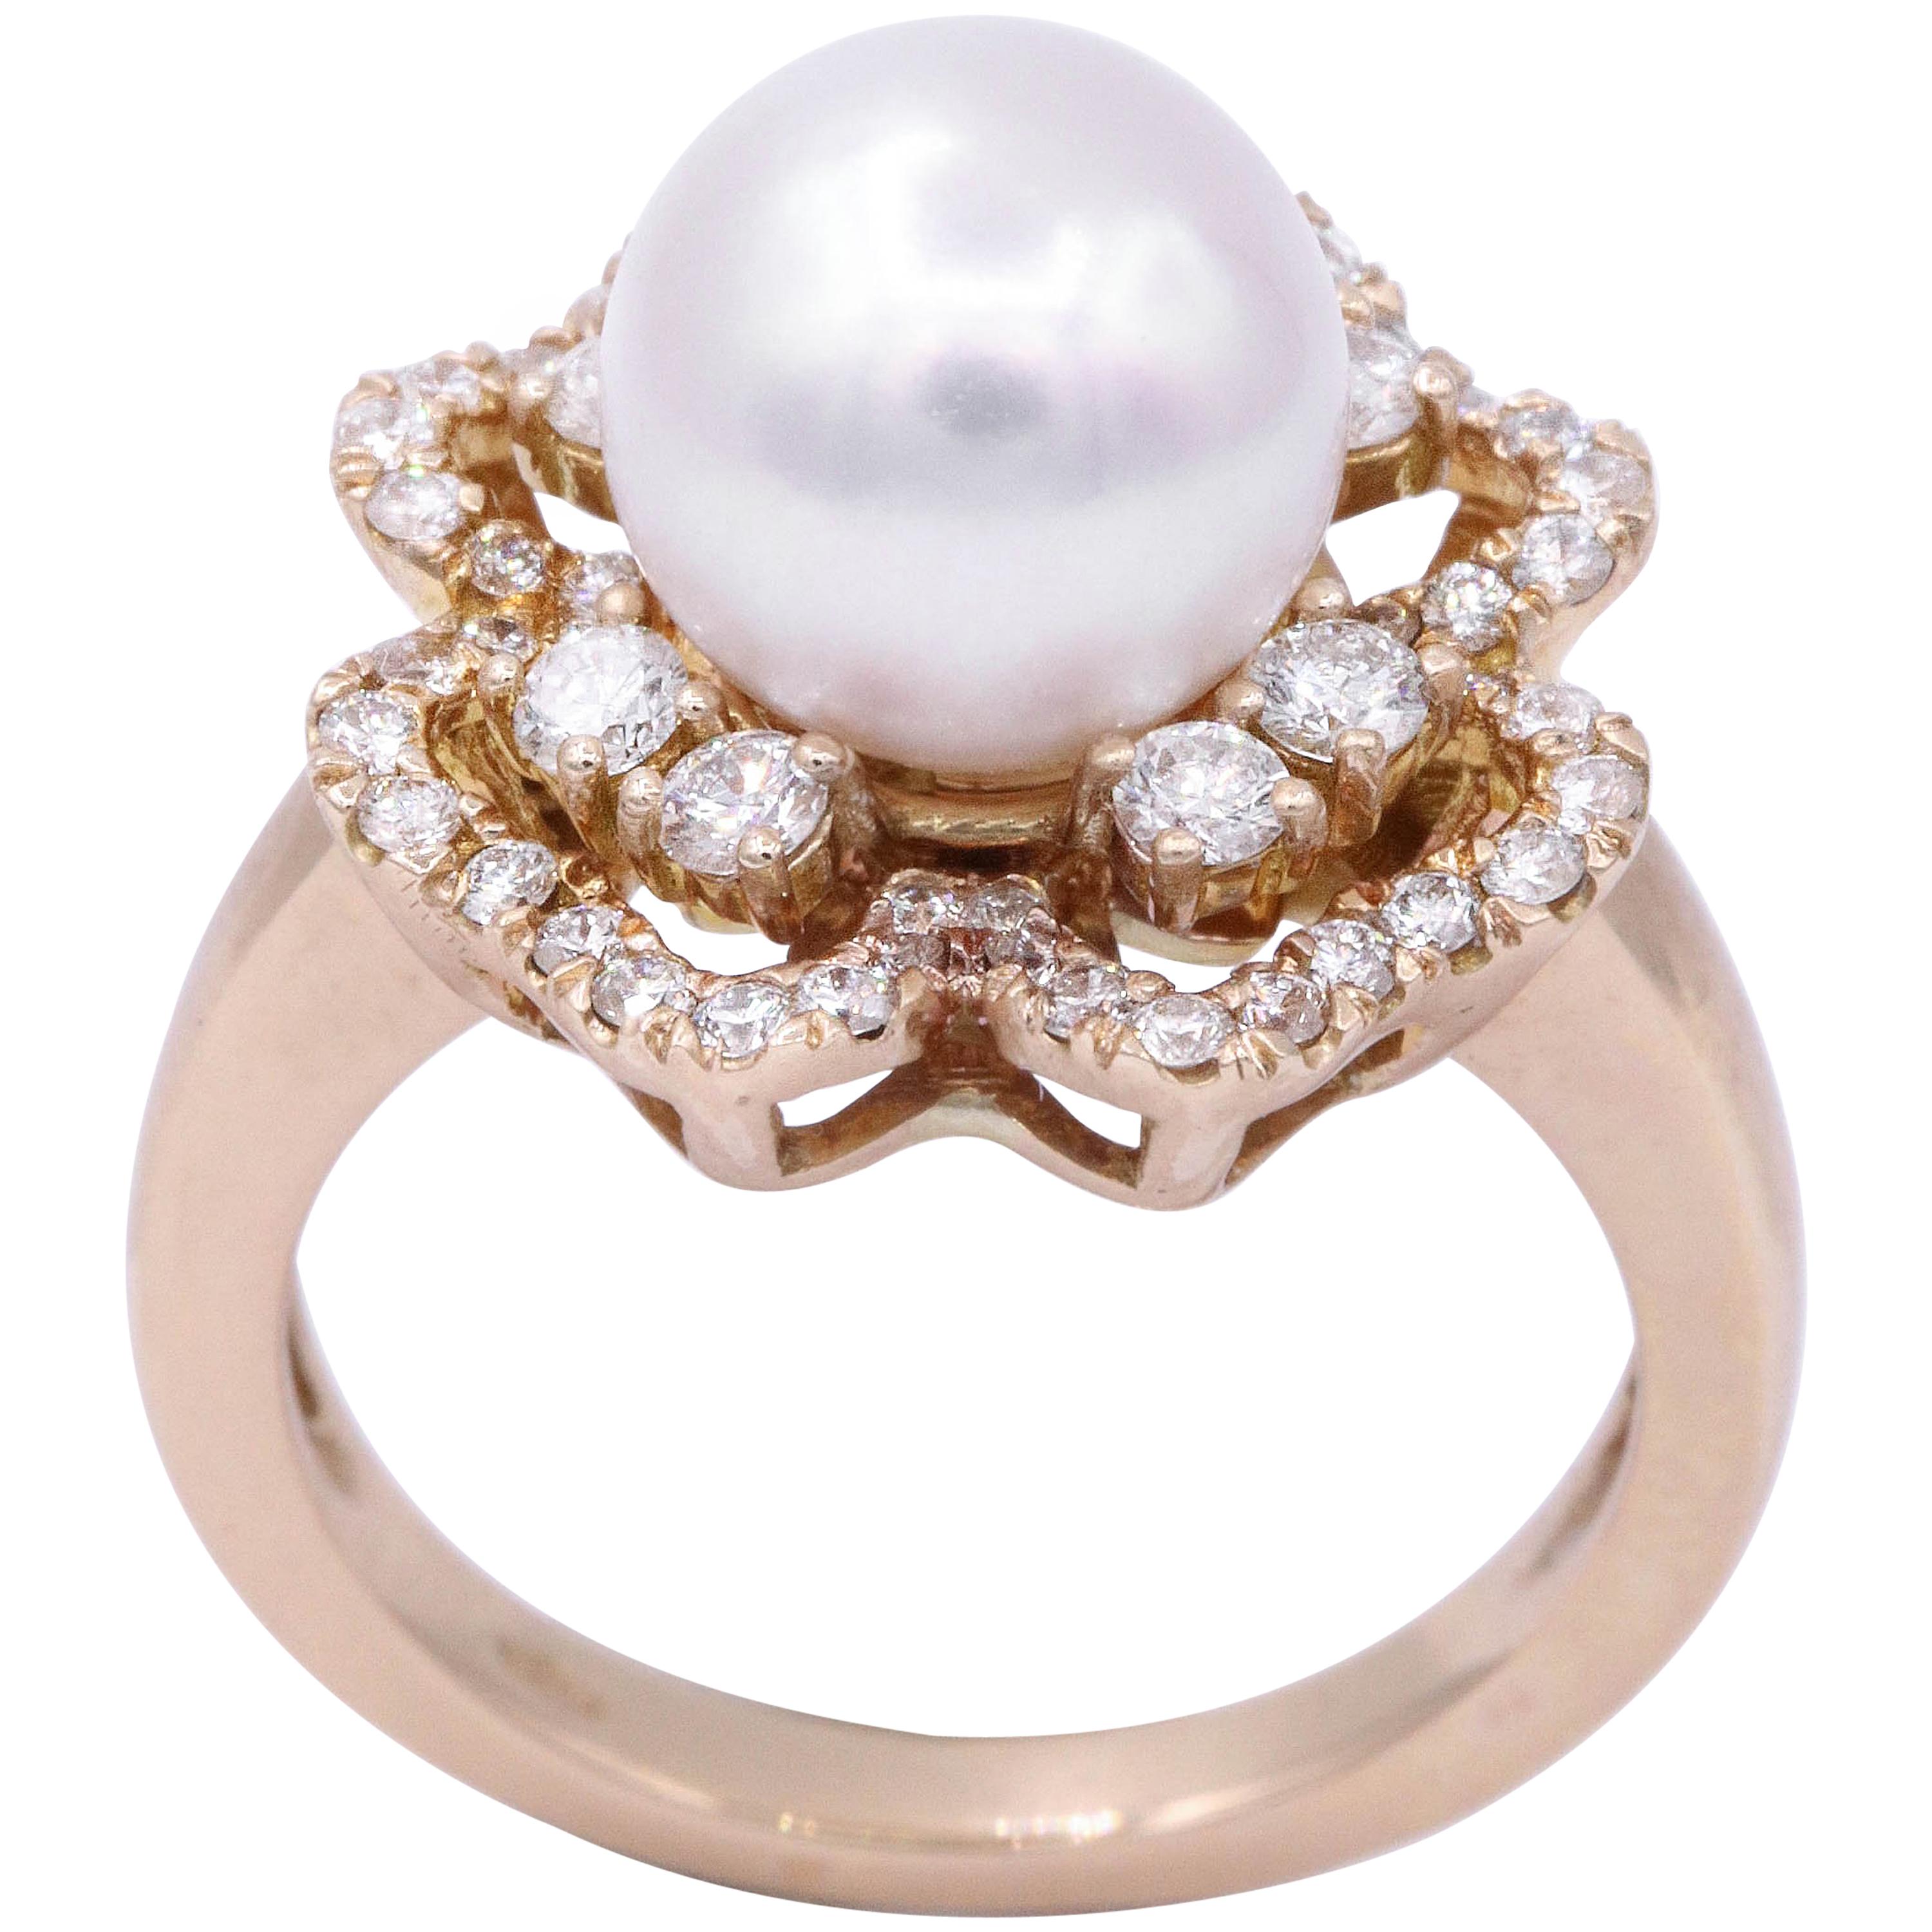 18K Rose gold featuring 0.74 round diamond F-G SI Quality
Akoya white Japanese pearl with pink overtone 9mm
Size 6 
We can order it in your size  or we will re size it fee of charge 